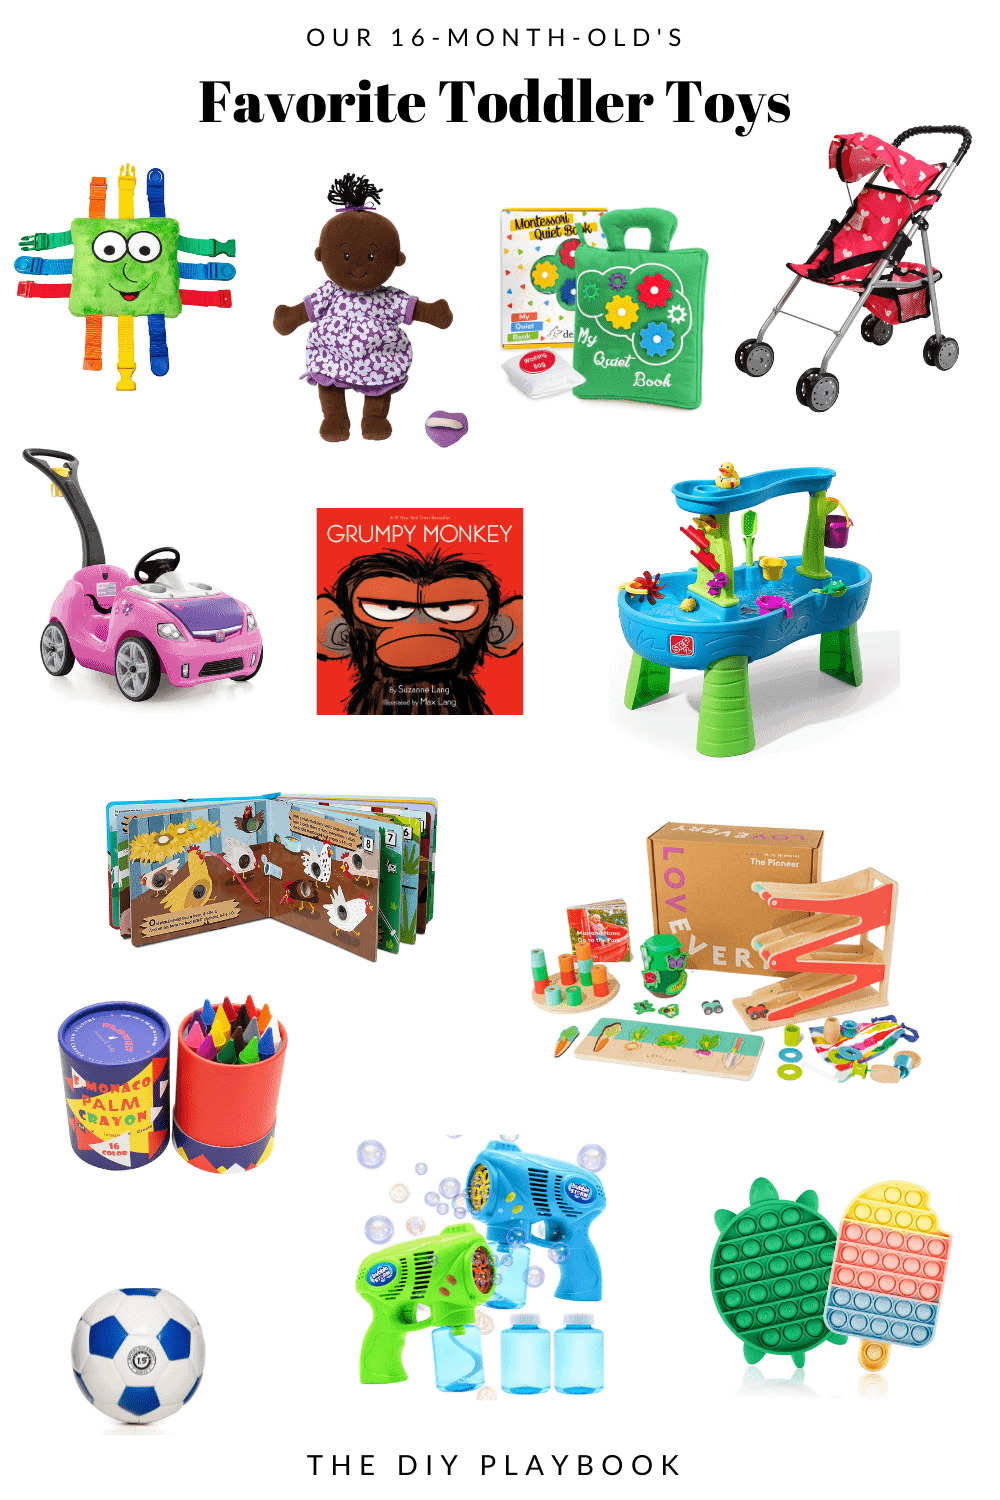 Our 16-month-old's favorite toddler toys